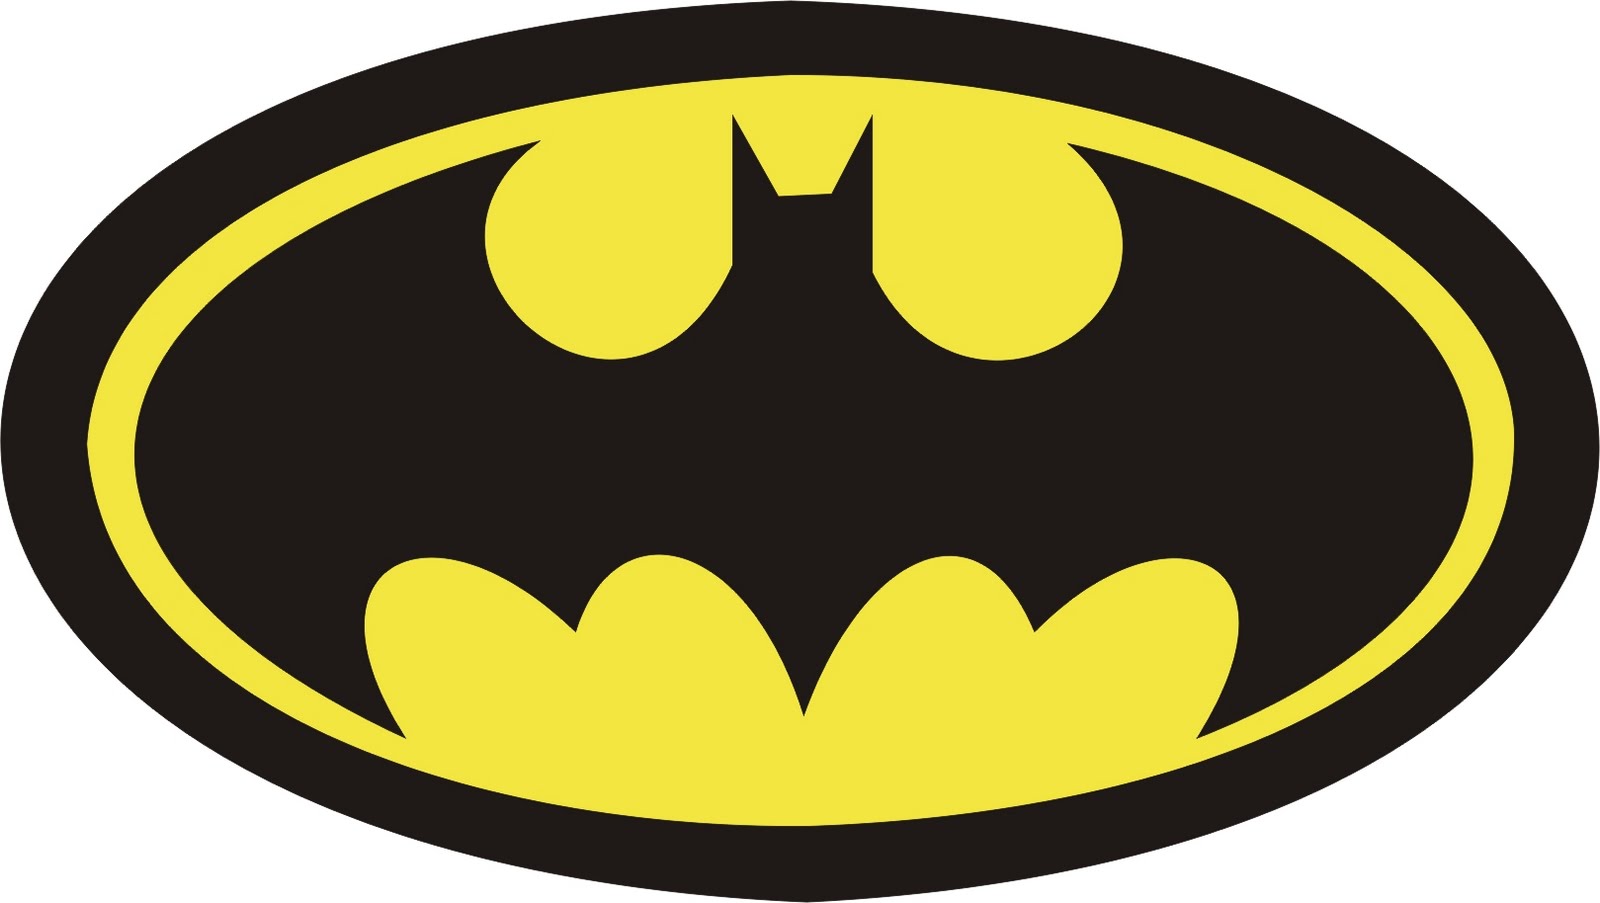 Great How To Draw Batman Logo of all time Check it out now 